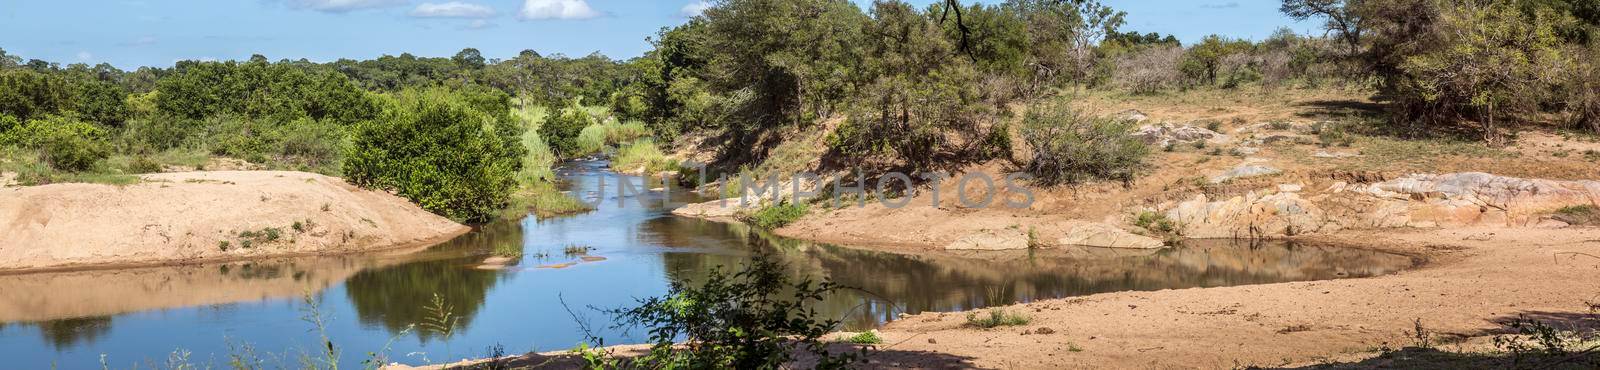 Panoramic of Sabie river in Kruger National park, South Africa